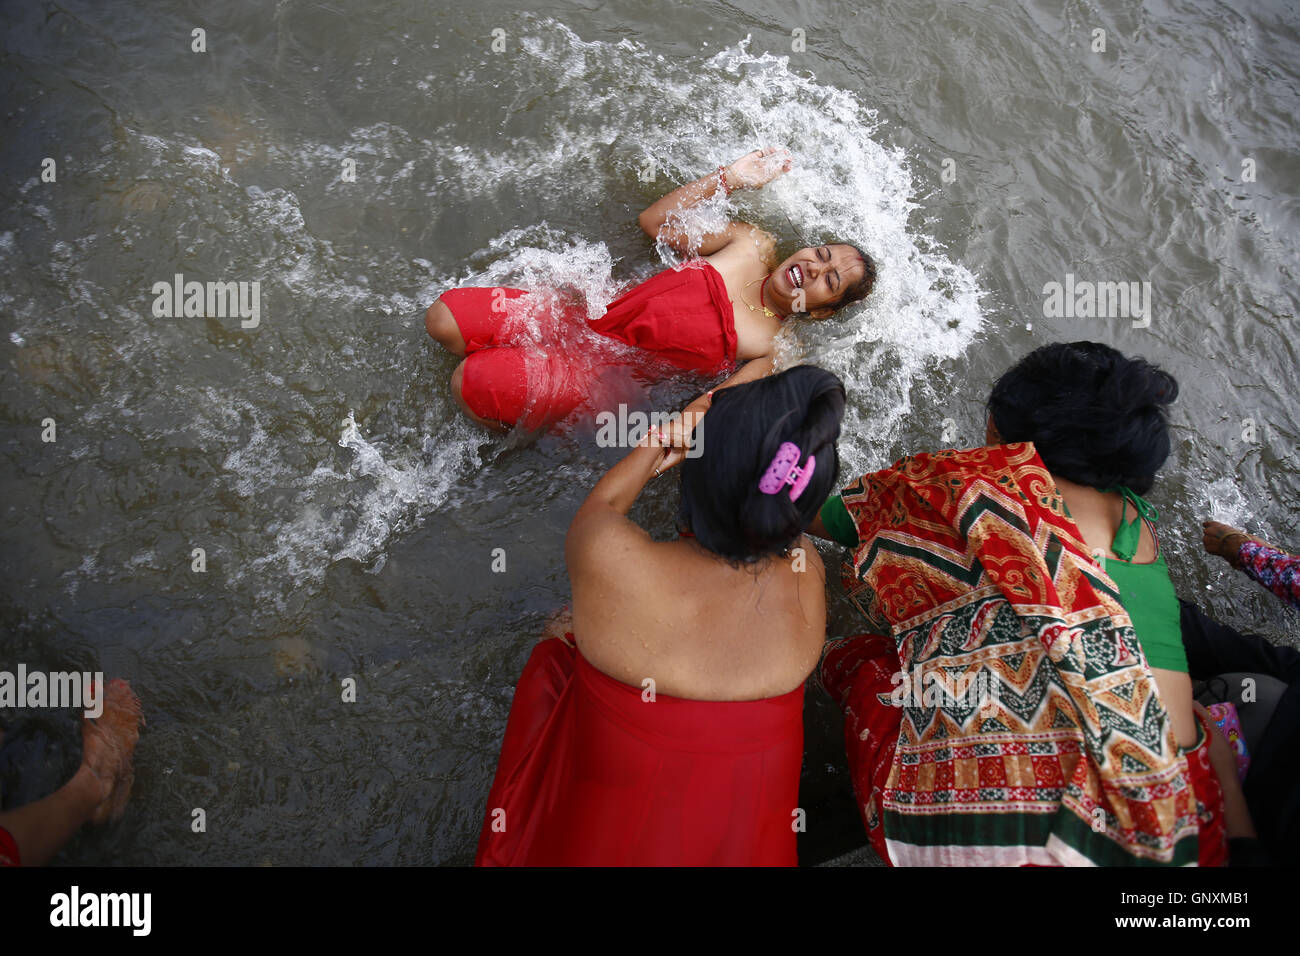 Kathmandu, Nepal. 1st Sep, 2016. A Nepalese Hindu devotee takes a holy dip on the banks of the religious Bagmati River to commemorate Fathers day or Kuse Aunse at Gokarna Temple in Kathmandu, Nepal on Thursday, September 1, 2016. On this particular day Hindu devotees from all over the country come to perform prayers by taking holy dips and offering worship in memory of their deceased fathers for eternal peace. Credit:  Skanda Gautam/ZUMA Wire/Alamy Live News Stock Photo